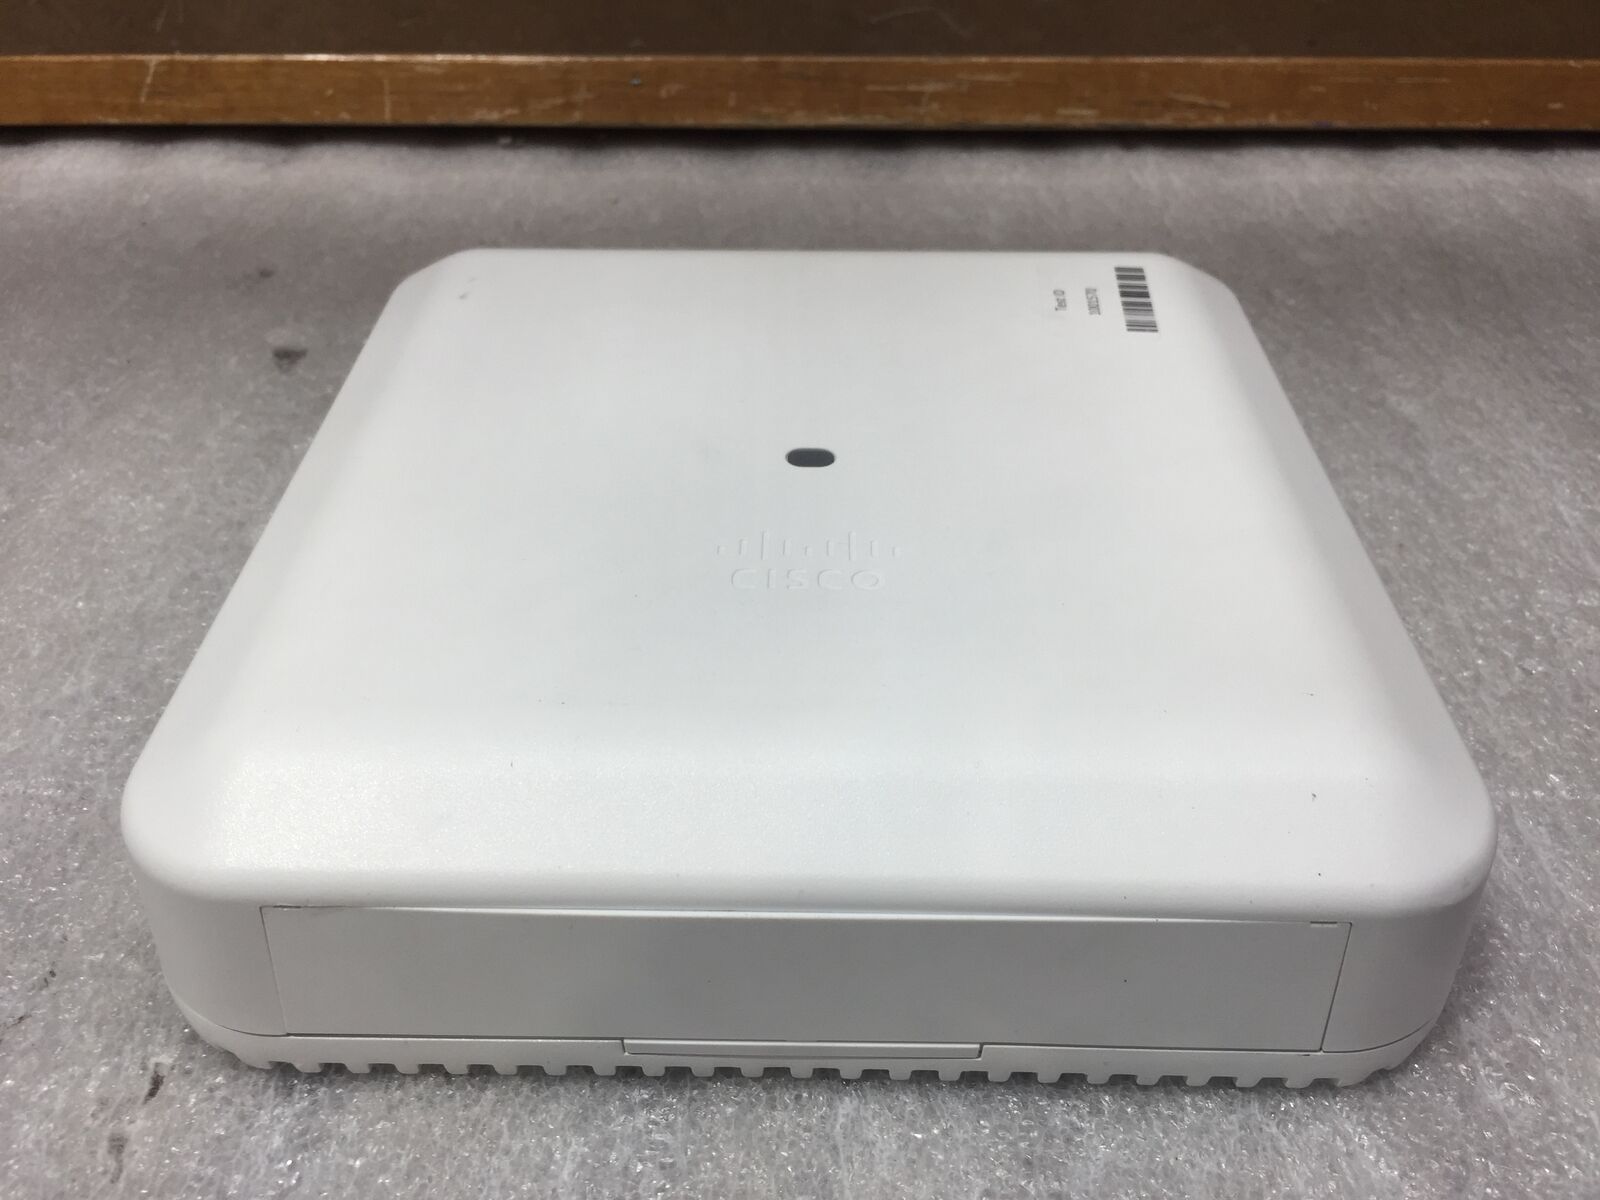 Cisco Aironet 3802i AIR-AP3802I-B-K9 Wireless Access Point PoE TESTED RESET